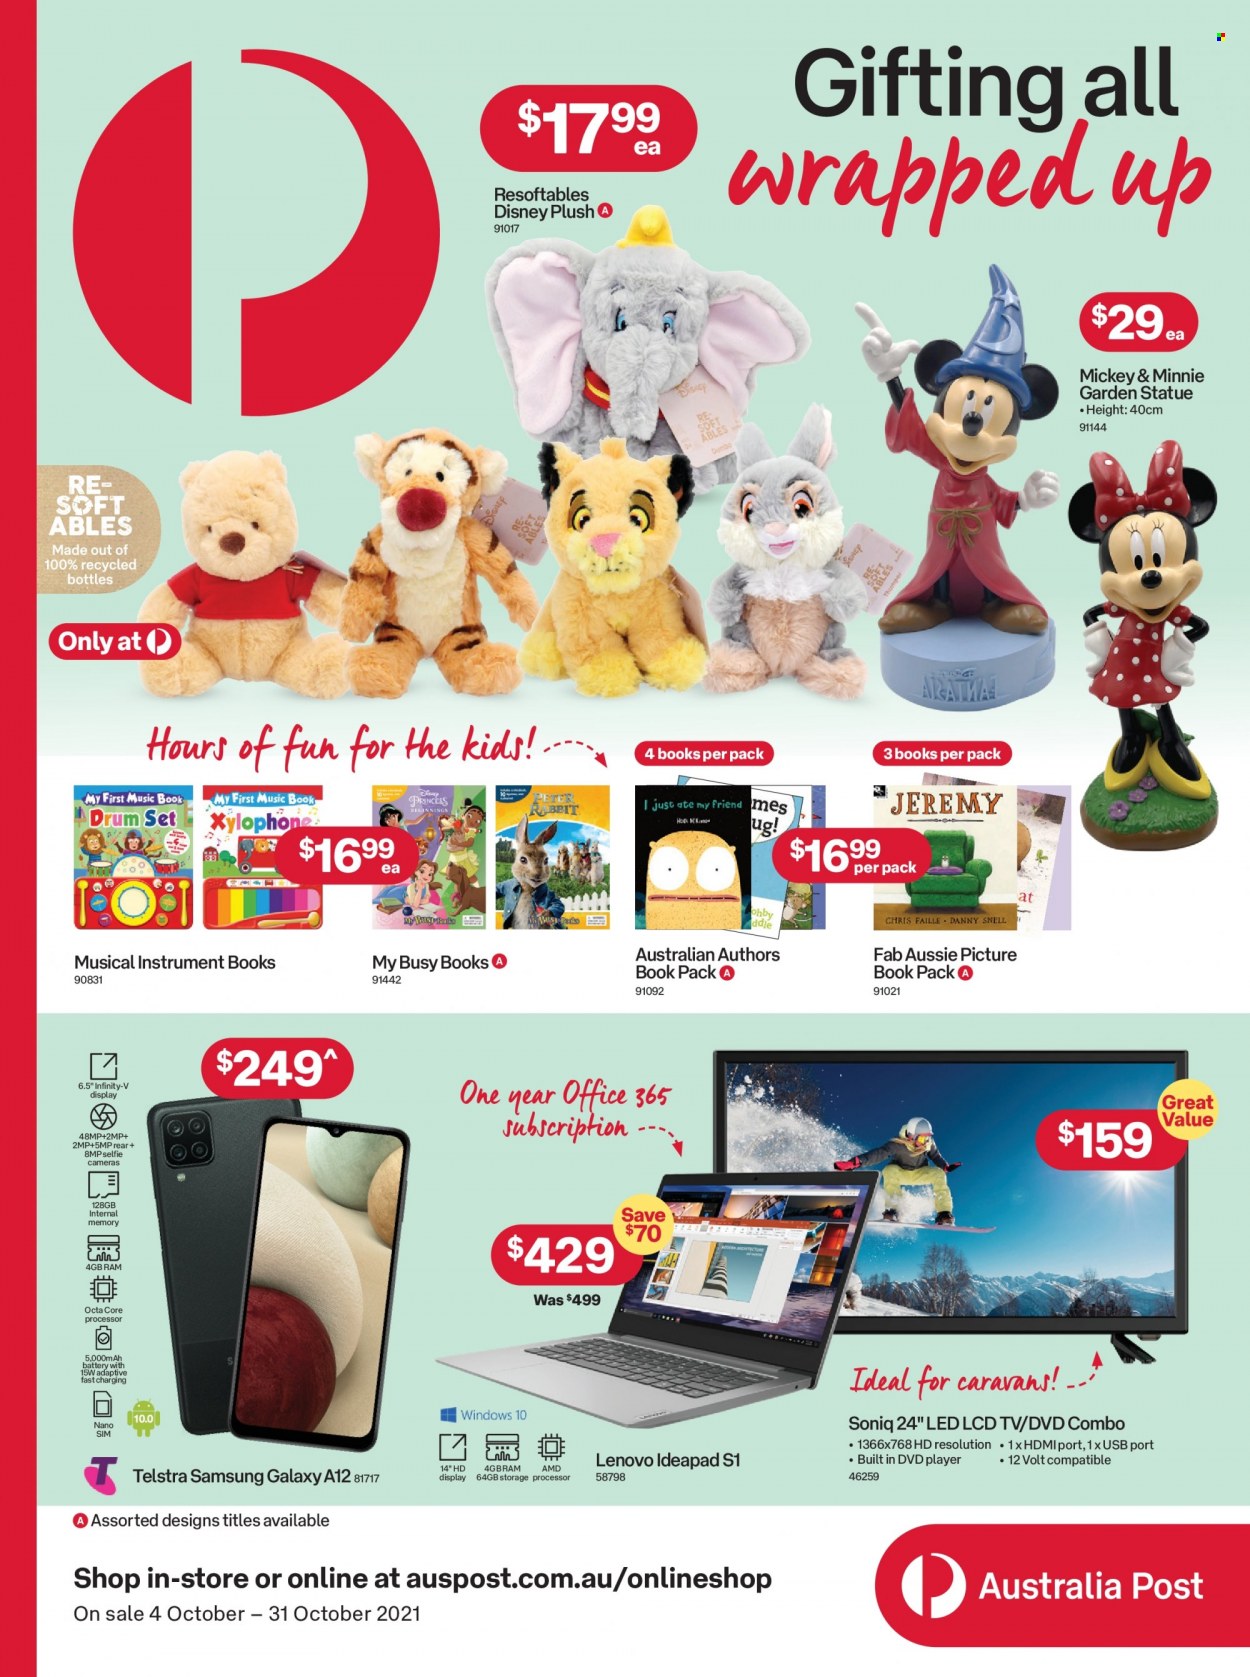 thumbnail - Australia Post Catalogue - 4 Oct 2021 - 31 Oct 2021 - Sales products - Lenovo, Samsung Galaxy, Mickey Mouse, Aussie, Disney, Minnie Mouse, book, children's book, xylophone, Samsung, Samsung Galaxy A, Samsung Galaxy A12, camera, TV, dvd player, princess. Page 1.